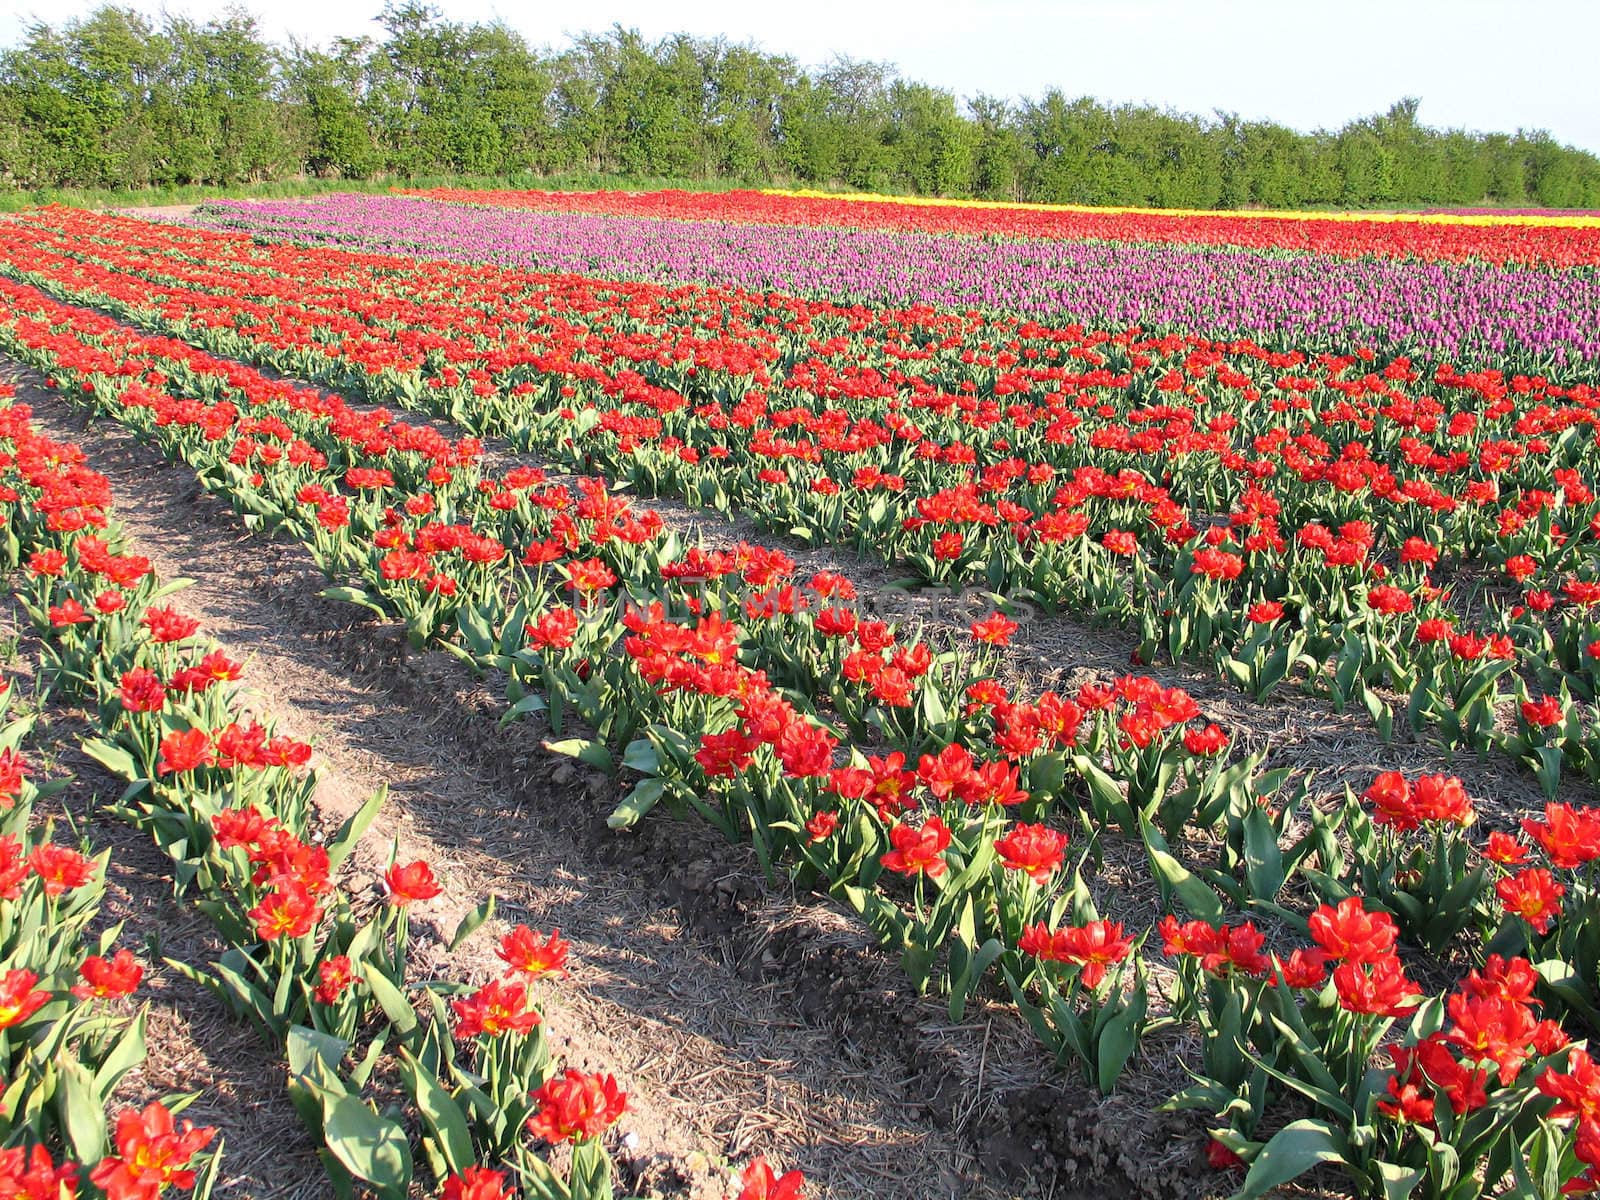 Field of red tulip in the spring by Ronyzmbow